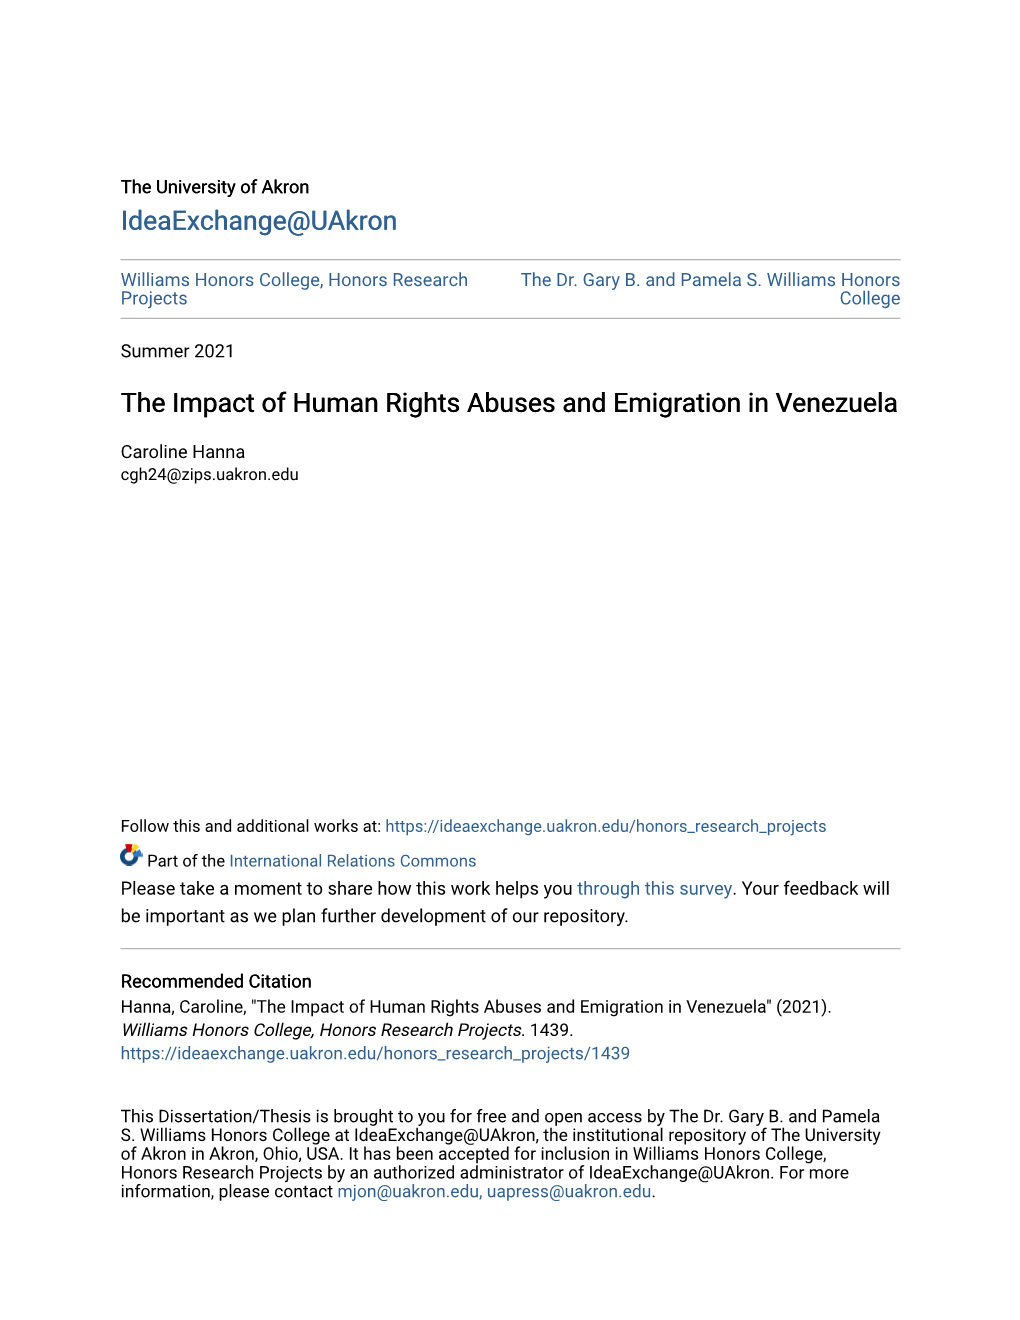 The Impact of Human Rights Abuses and Emigration in Venezuela